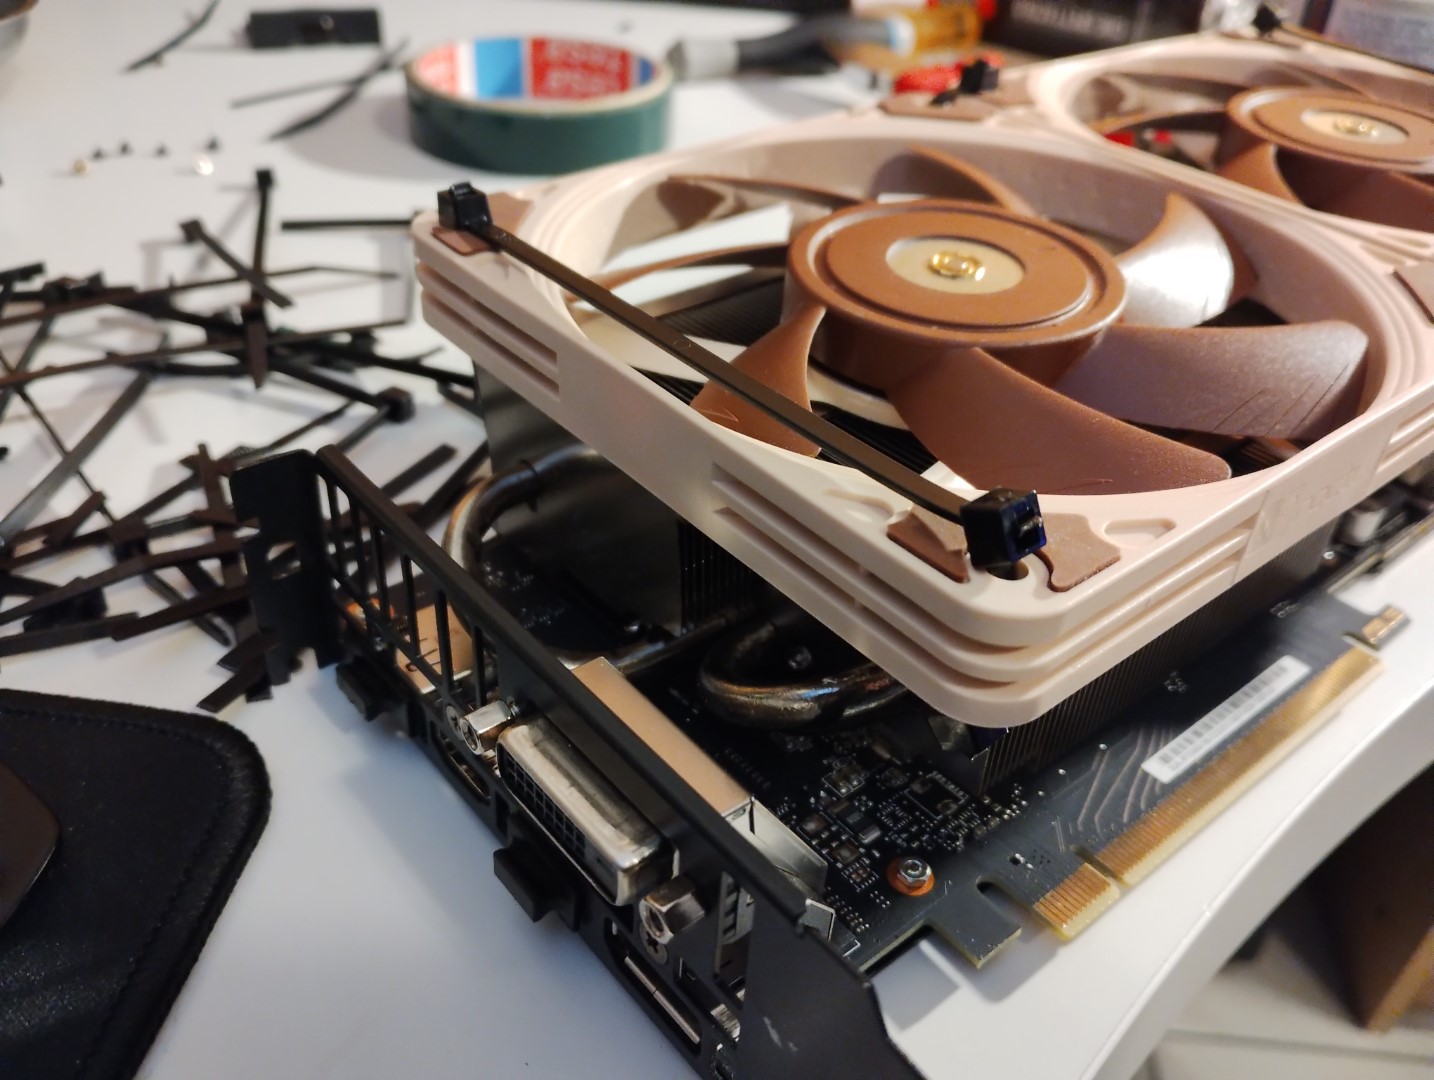 Modded with Noctua fans